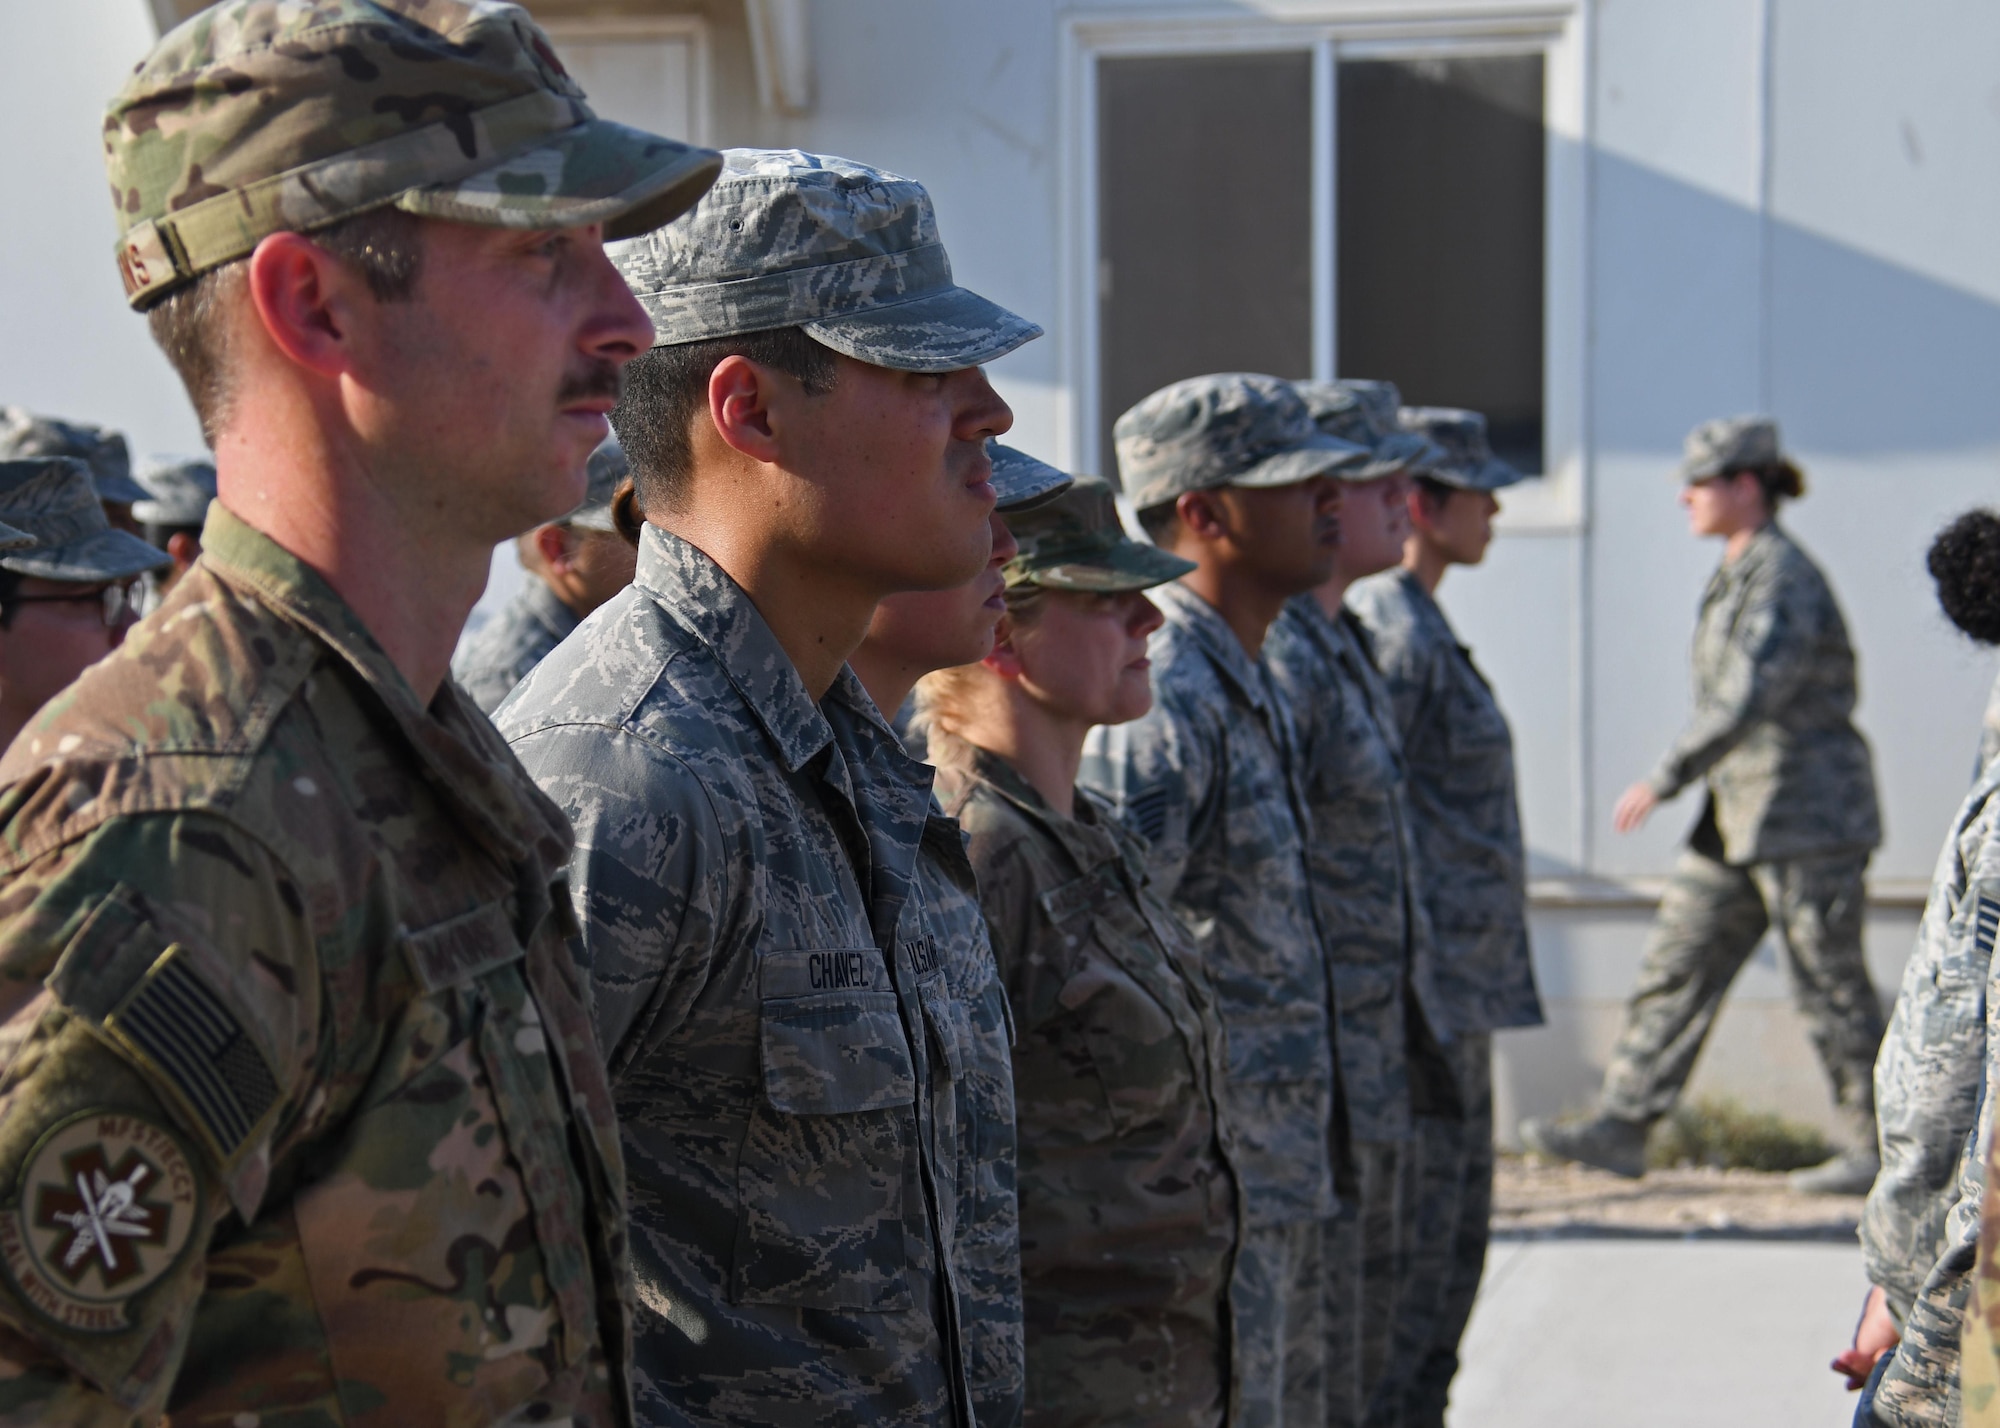 Airmen stand in formation before a Veterans Day retreat ceremony at Al Udeid Air Base, Qatar, Nov. 11, 2016. Veterans Day, originally known as Armistice Day, commemorates the service and sacrifice of U.S. veterans, both past and present. (U.S. Air Force photo by Senior Airman Miles Wilson)